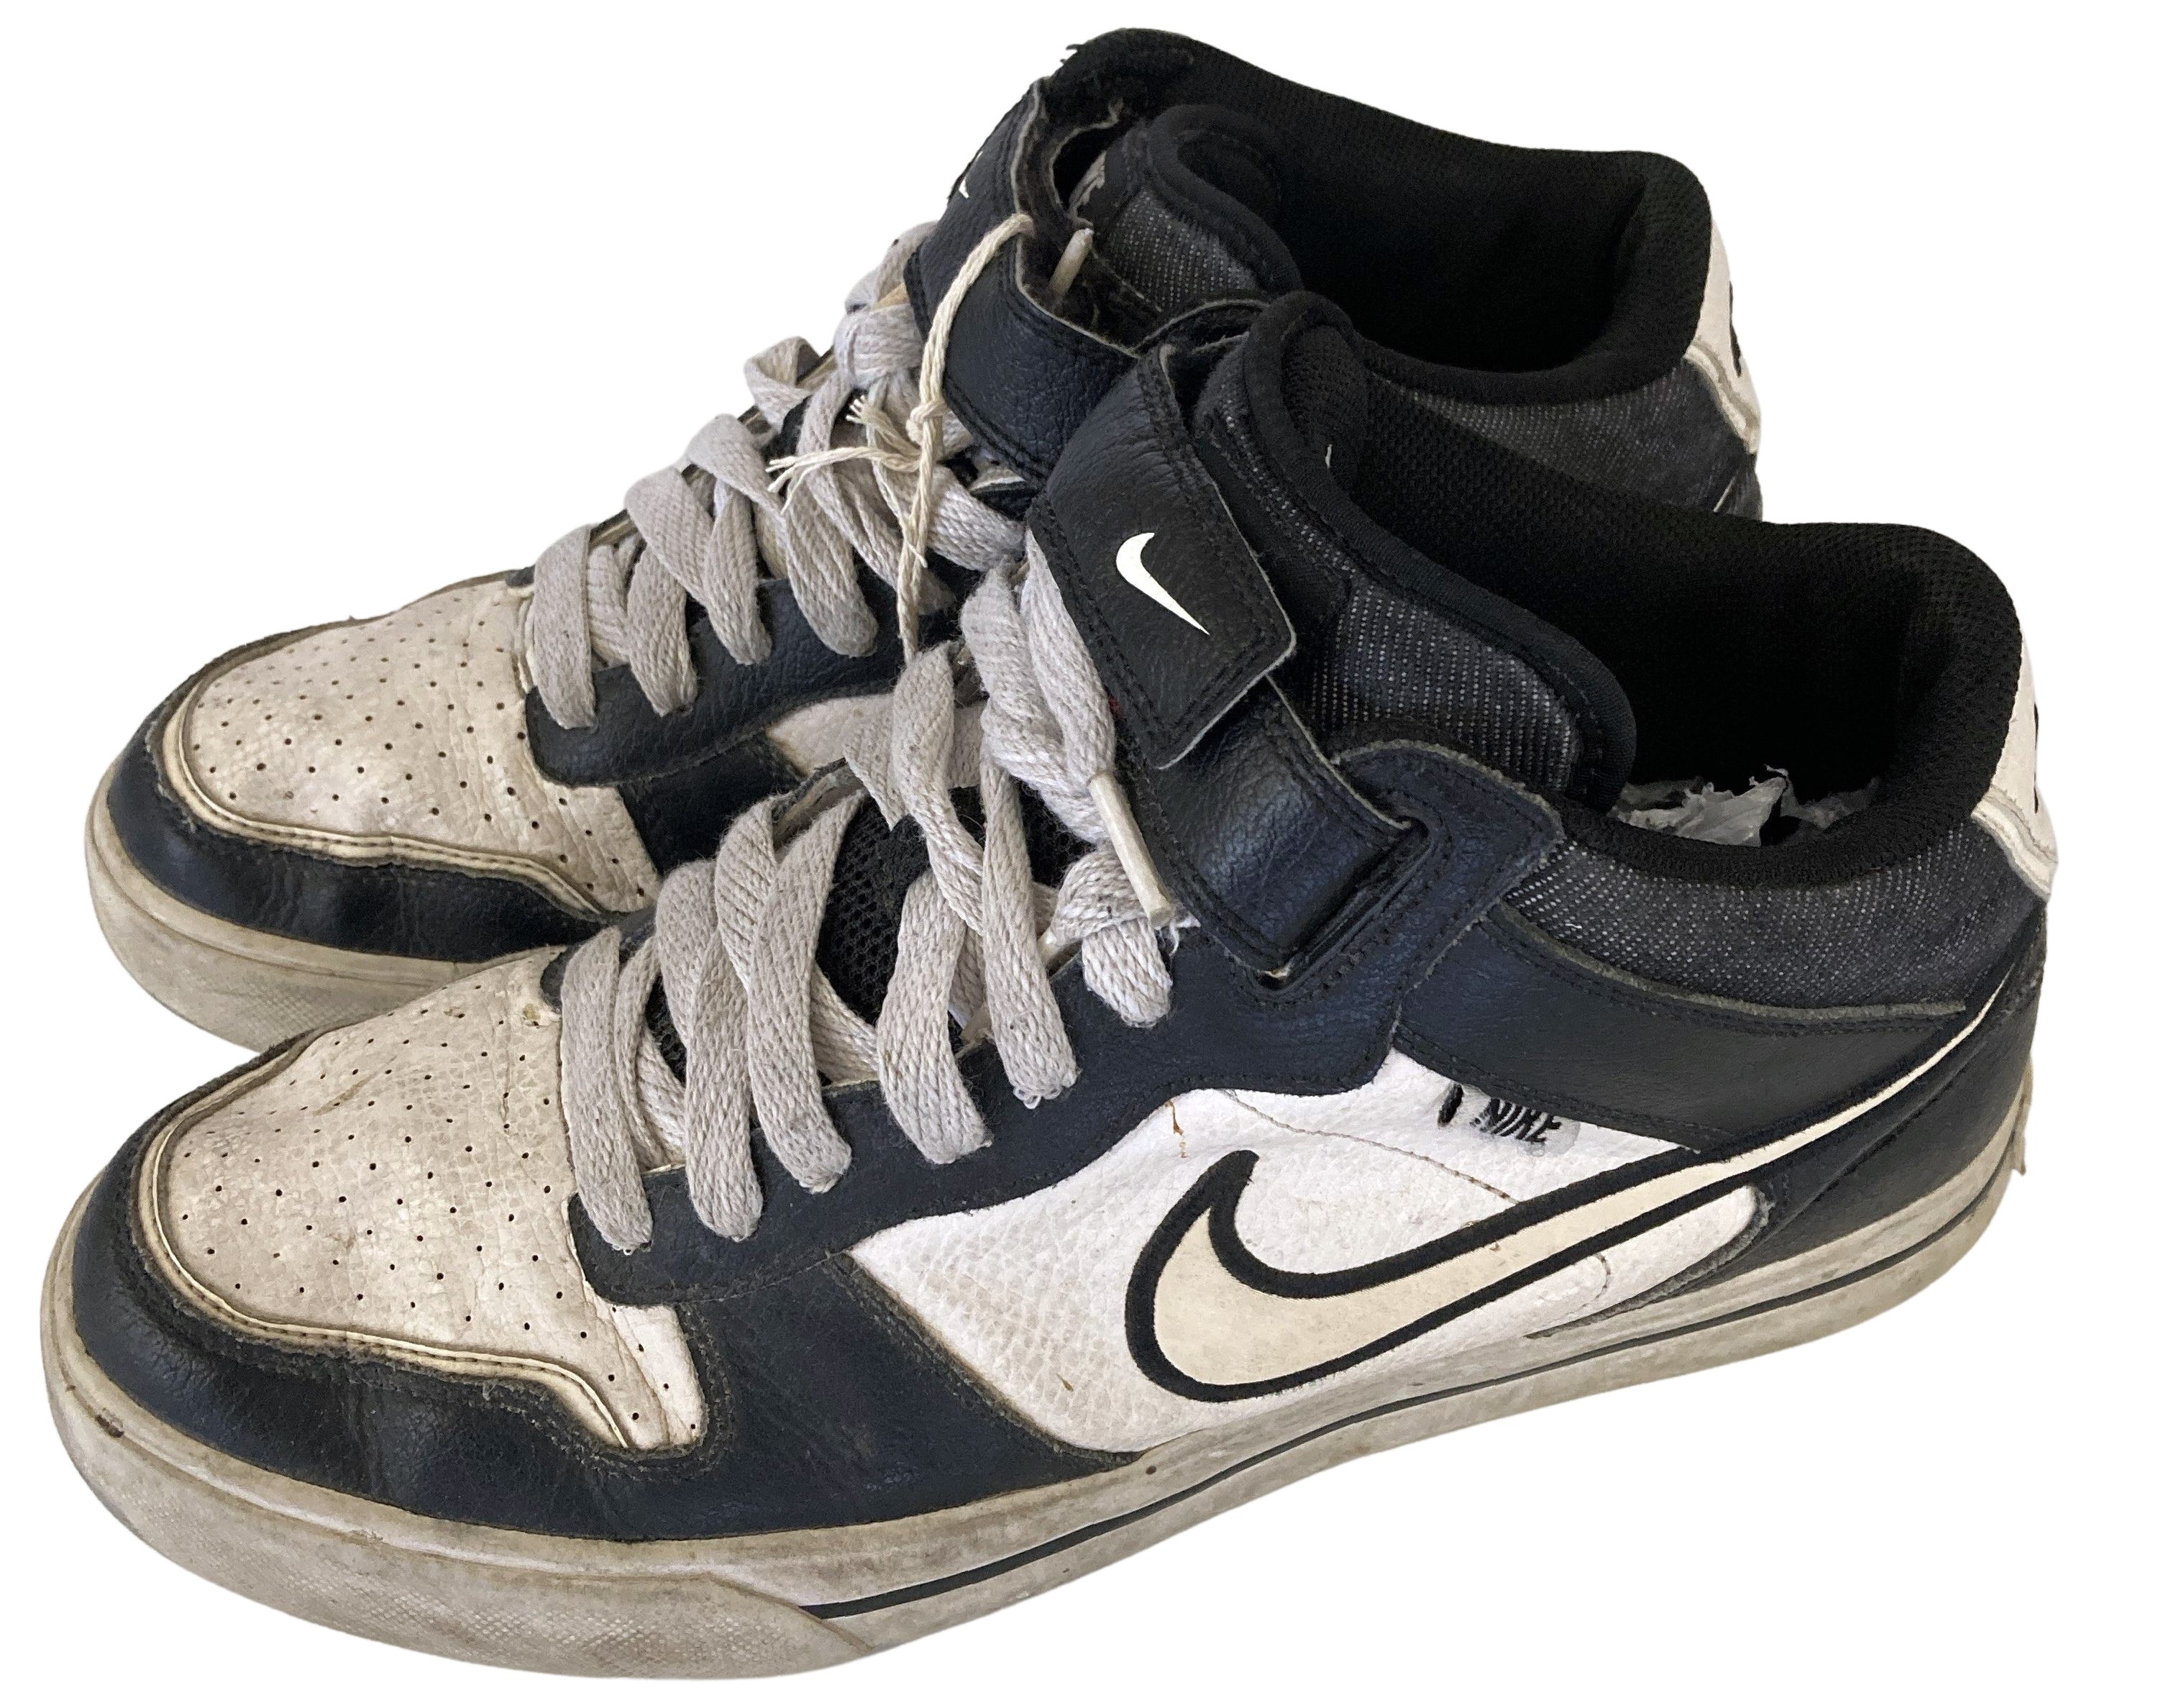 Lot 612 - ED SHEERAN'S OWNED AND WORN NIKE TRAINERS.